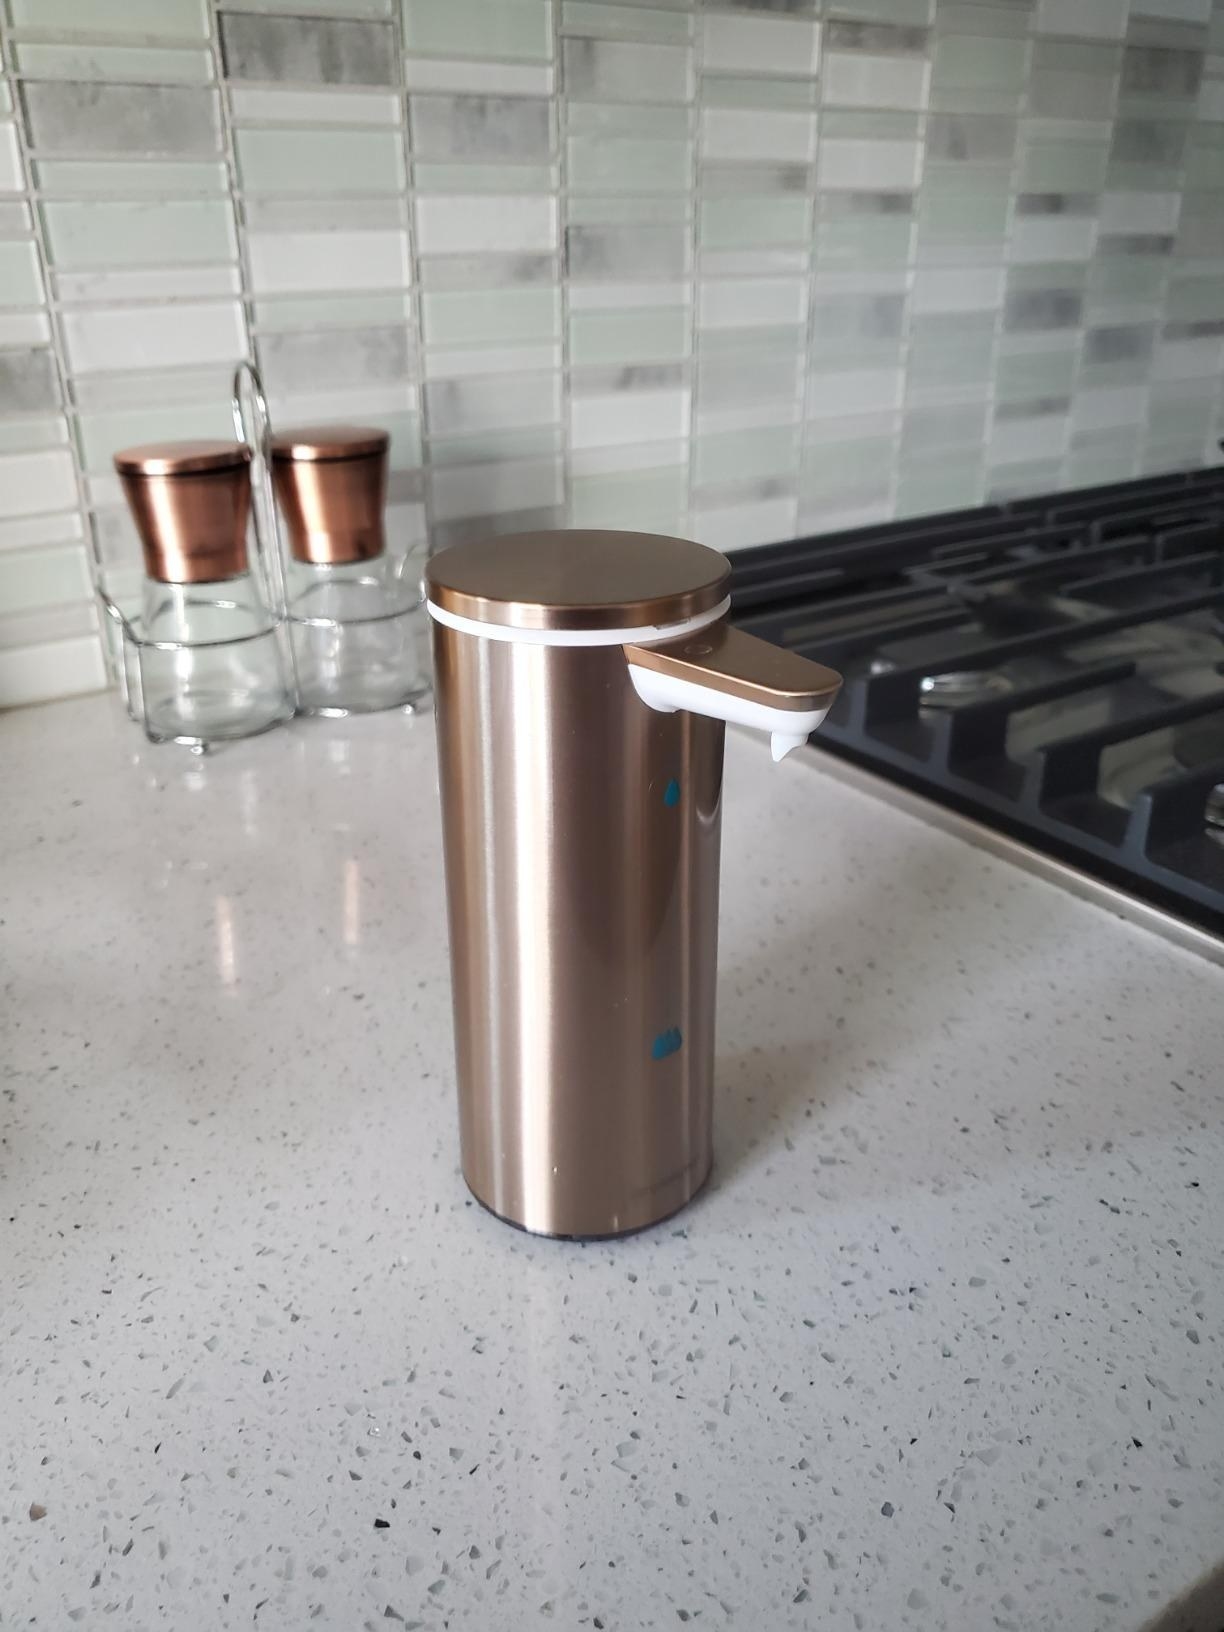 The rose gold soap dispenser on a kitchen counter